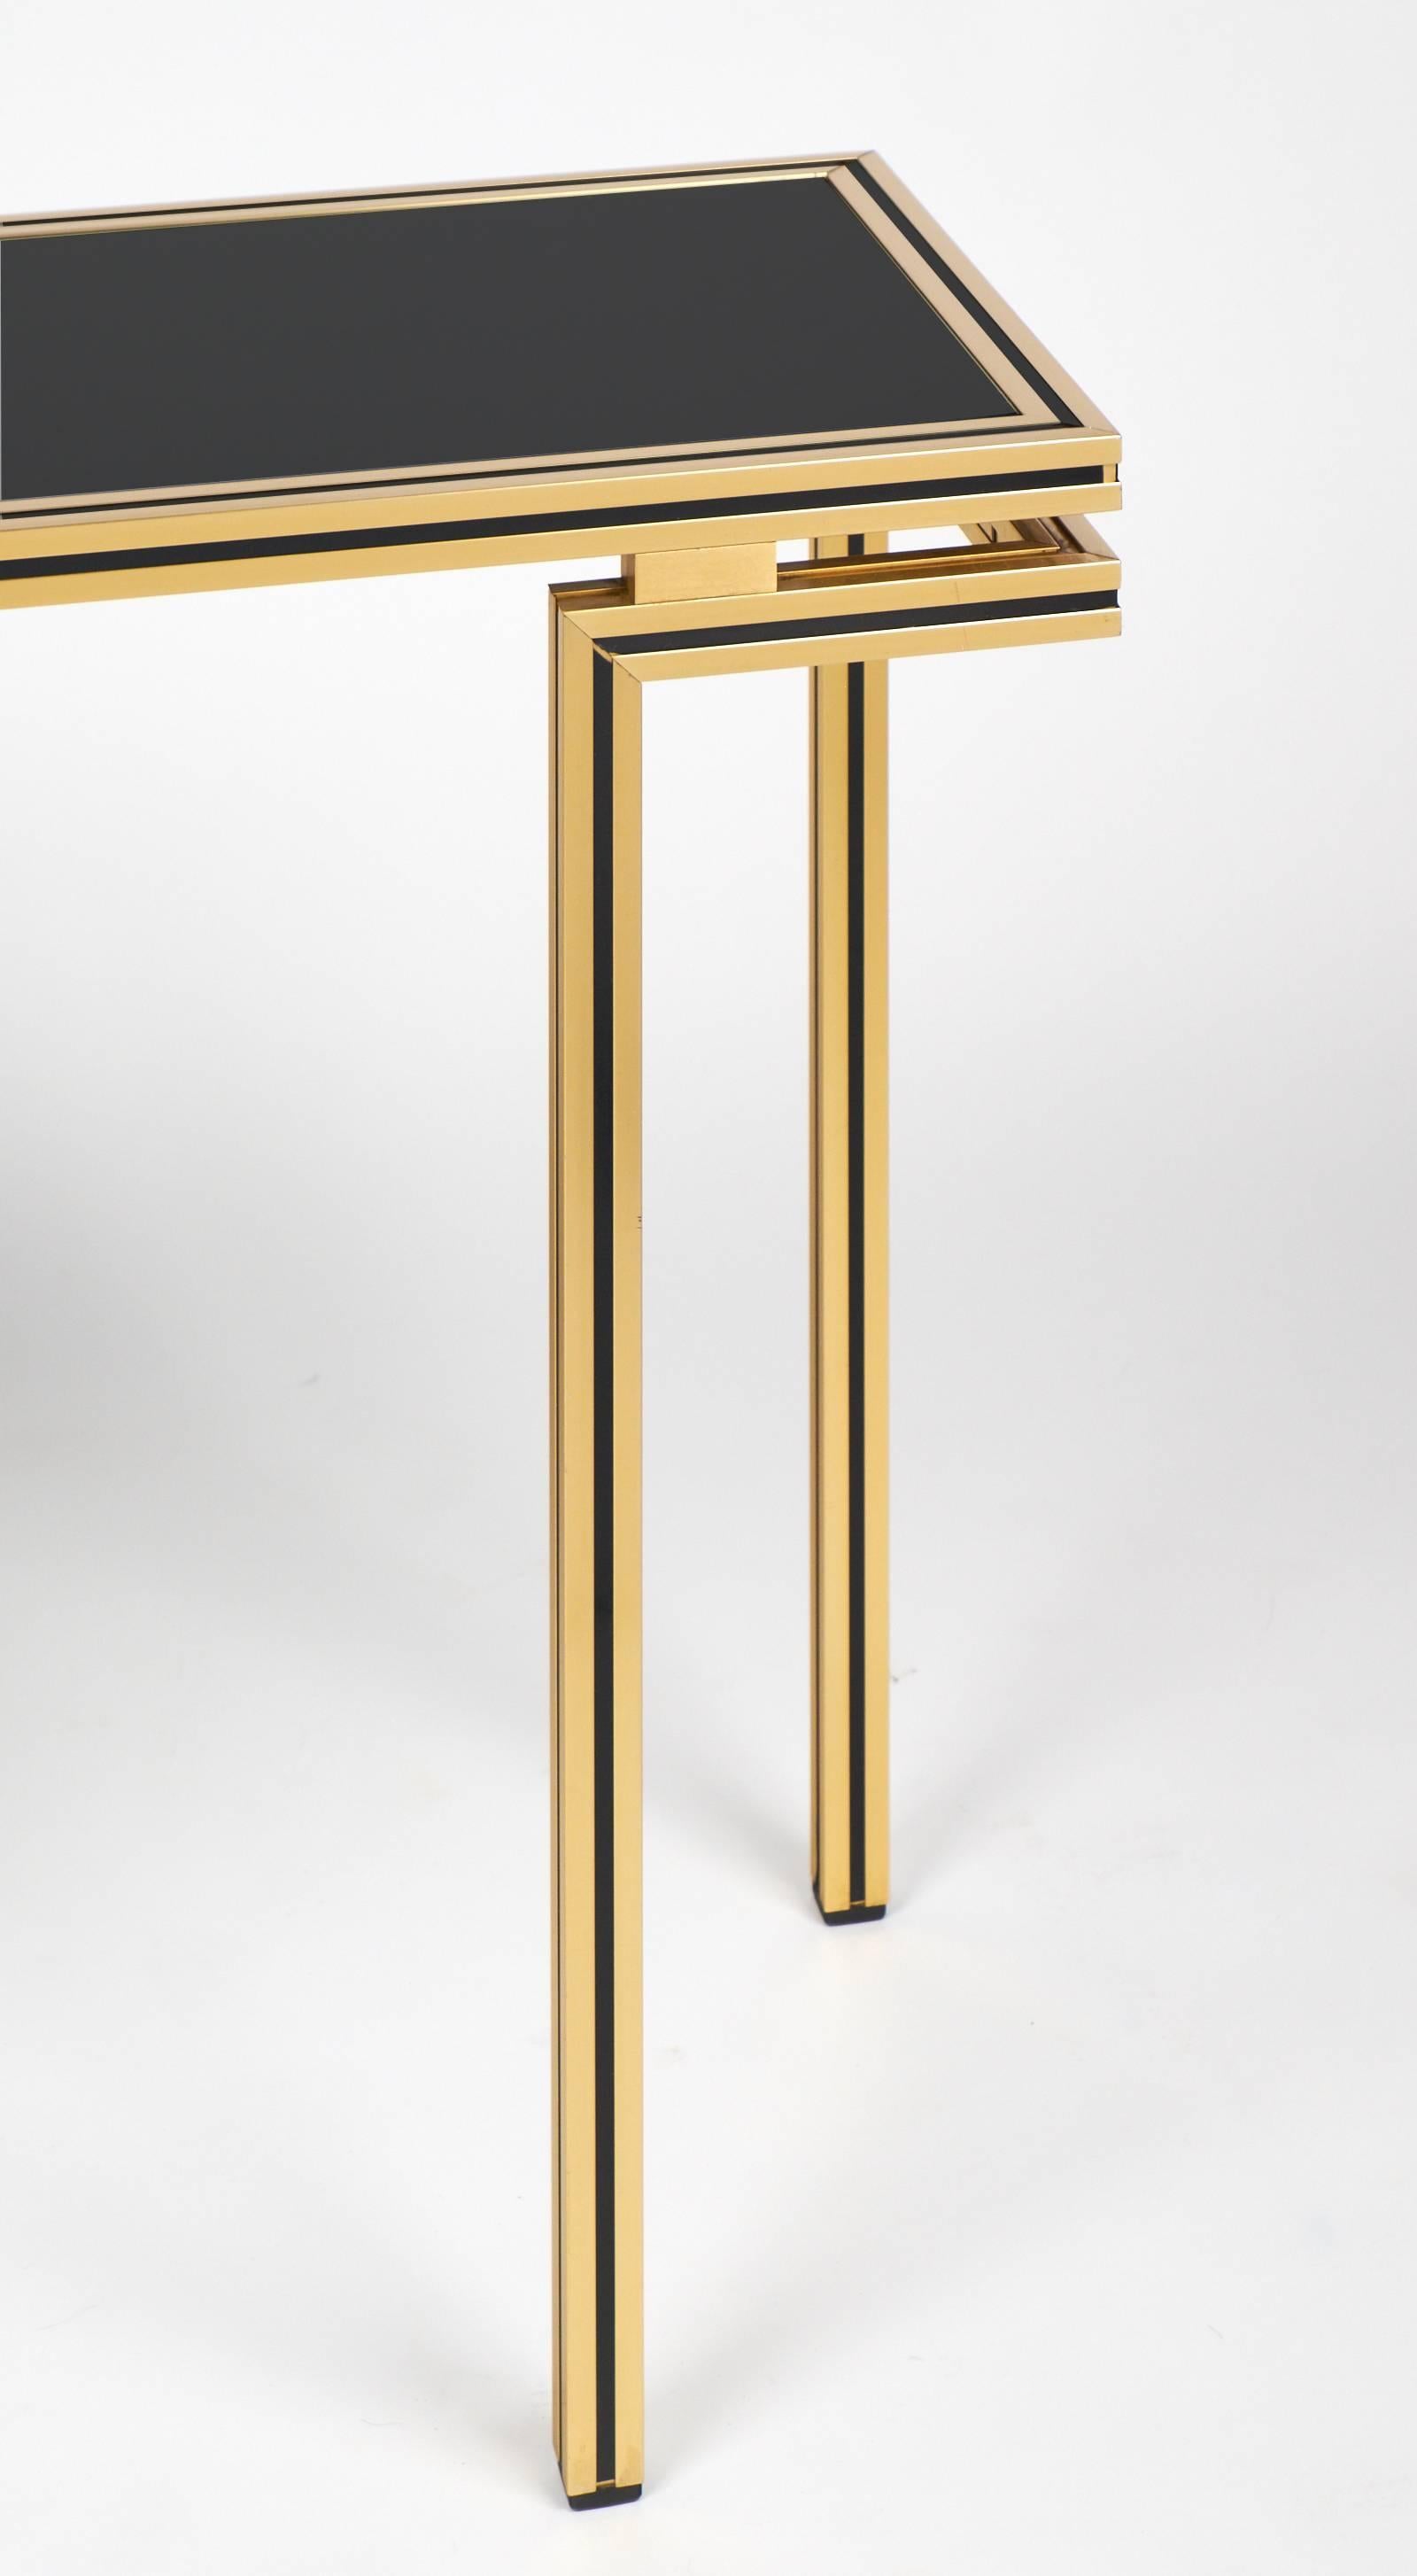 Lacquered Vintage Black Glass Top Brass Console Table by Pierre Vandel